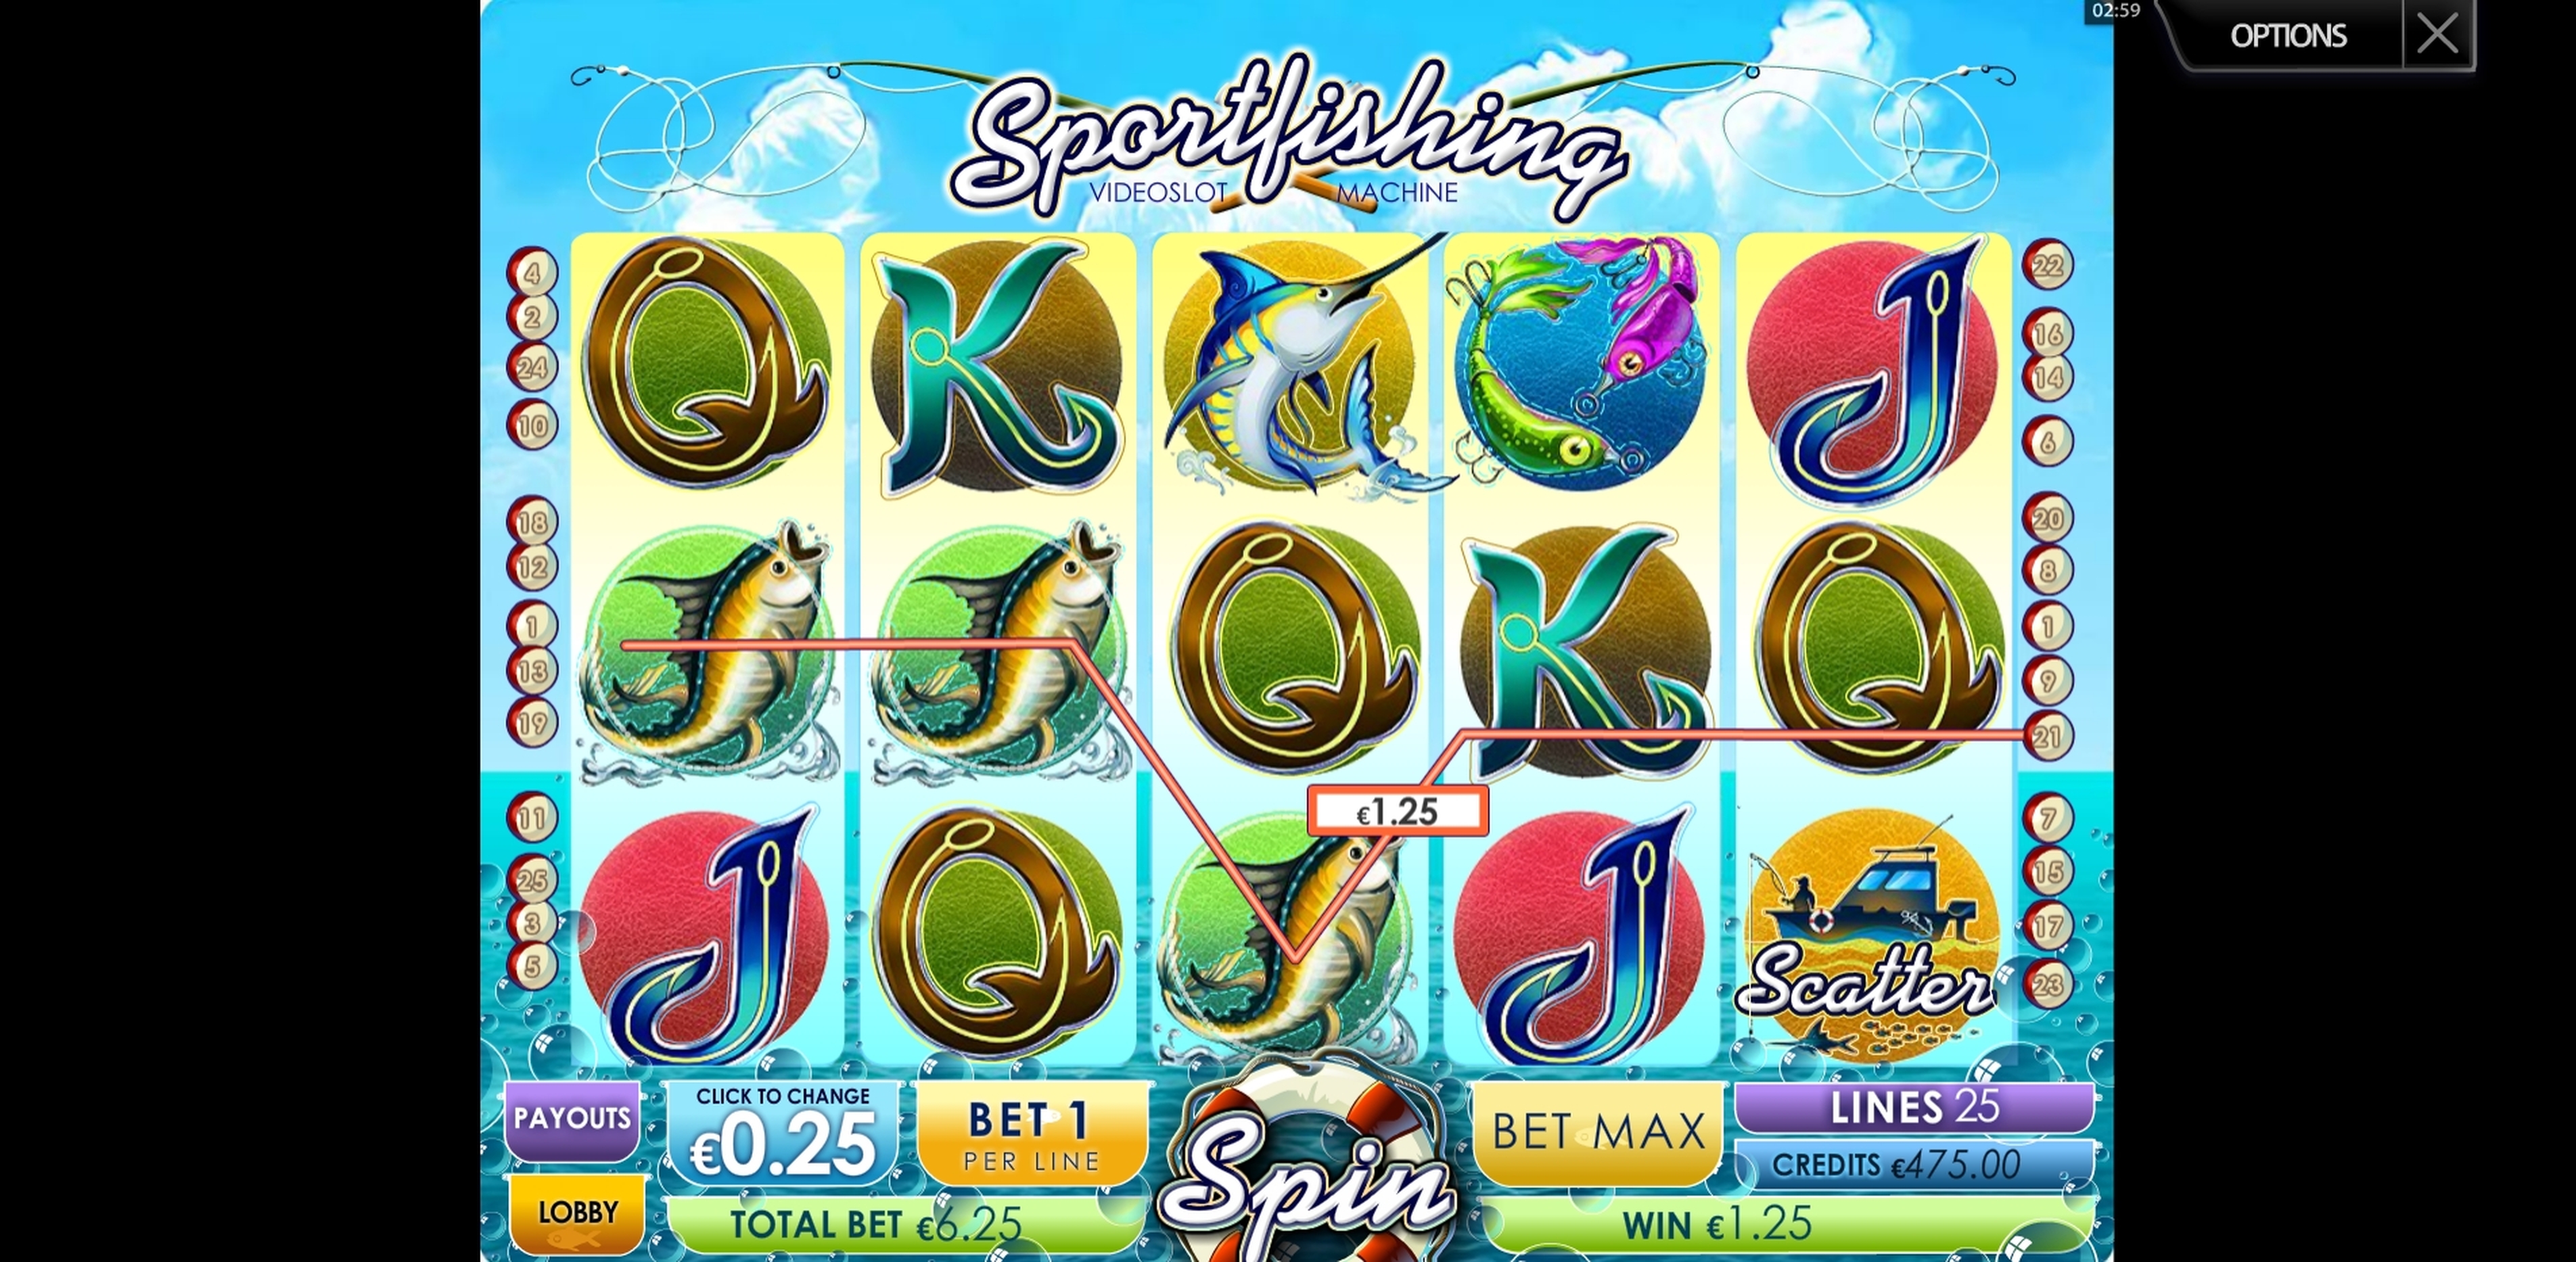 Win Money in Sportsfishing Free Slot Game by Multislot